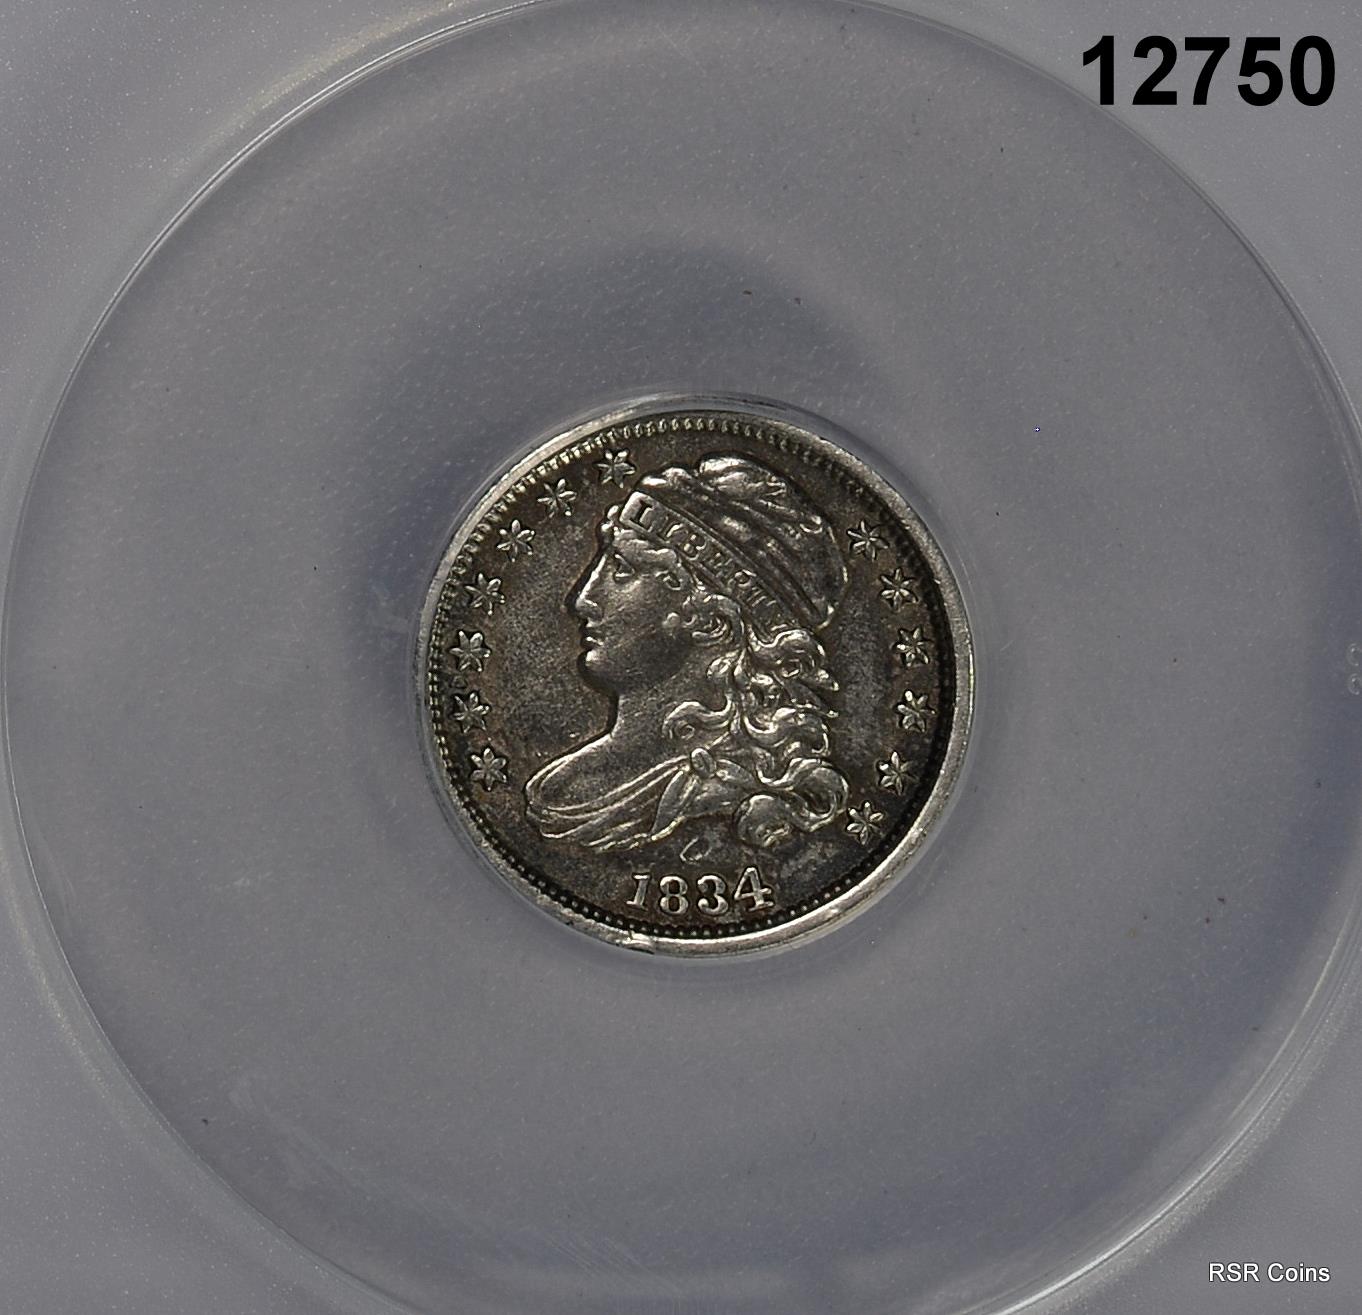 1834 CAPPED BUST DIME ANACS CERTIFIED EF40 CLEANED LOOKS BETTER! #12750